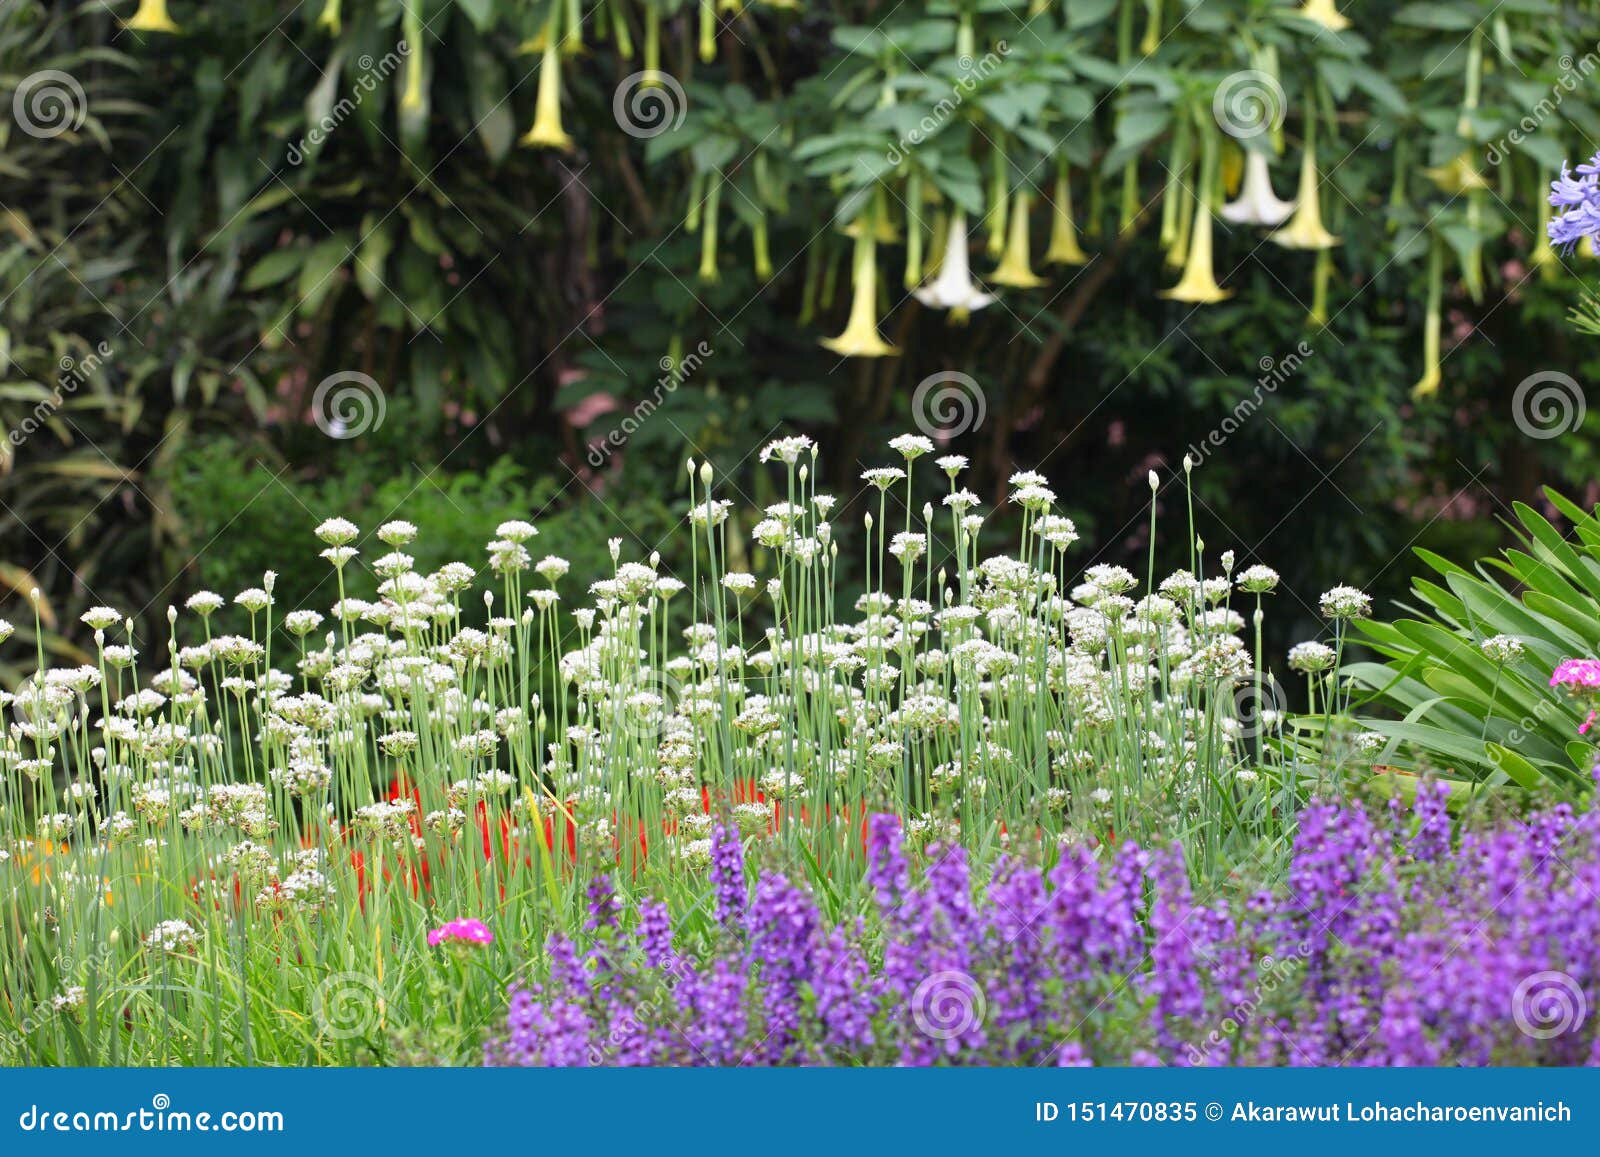 colorful bed of perennial and herbaceous plants in english cottage and country style garden